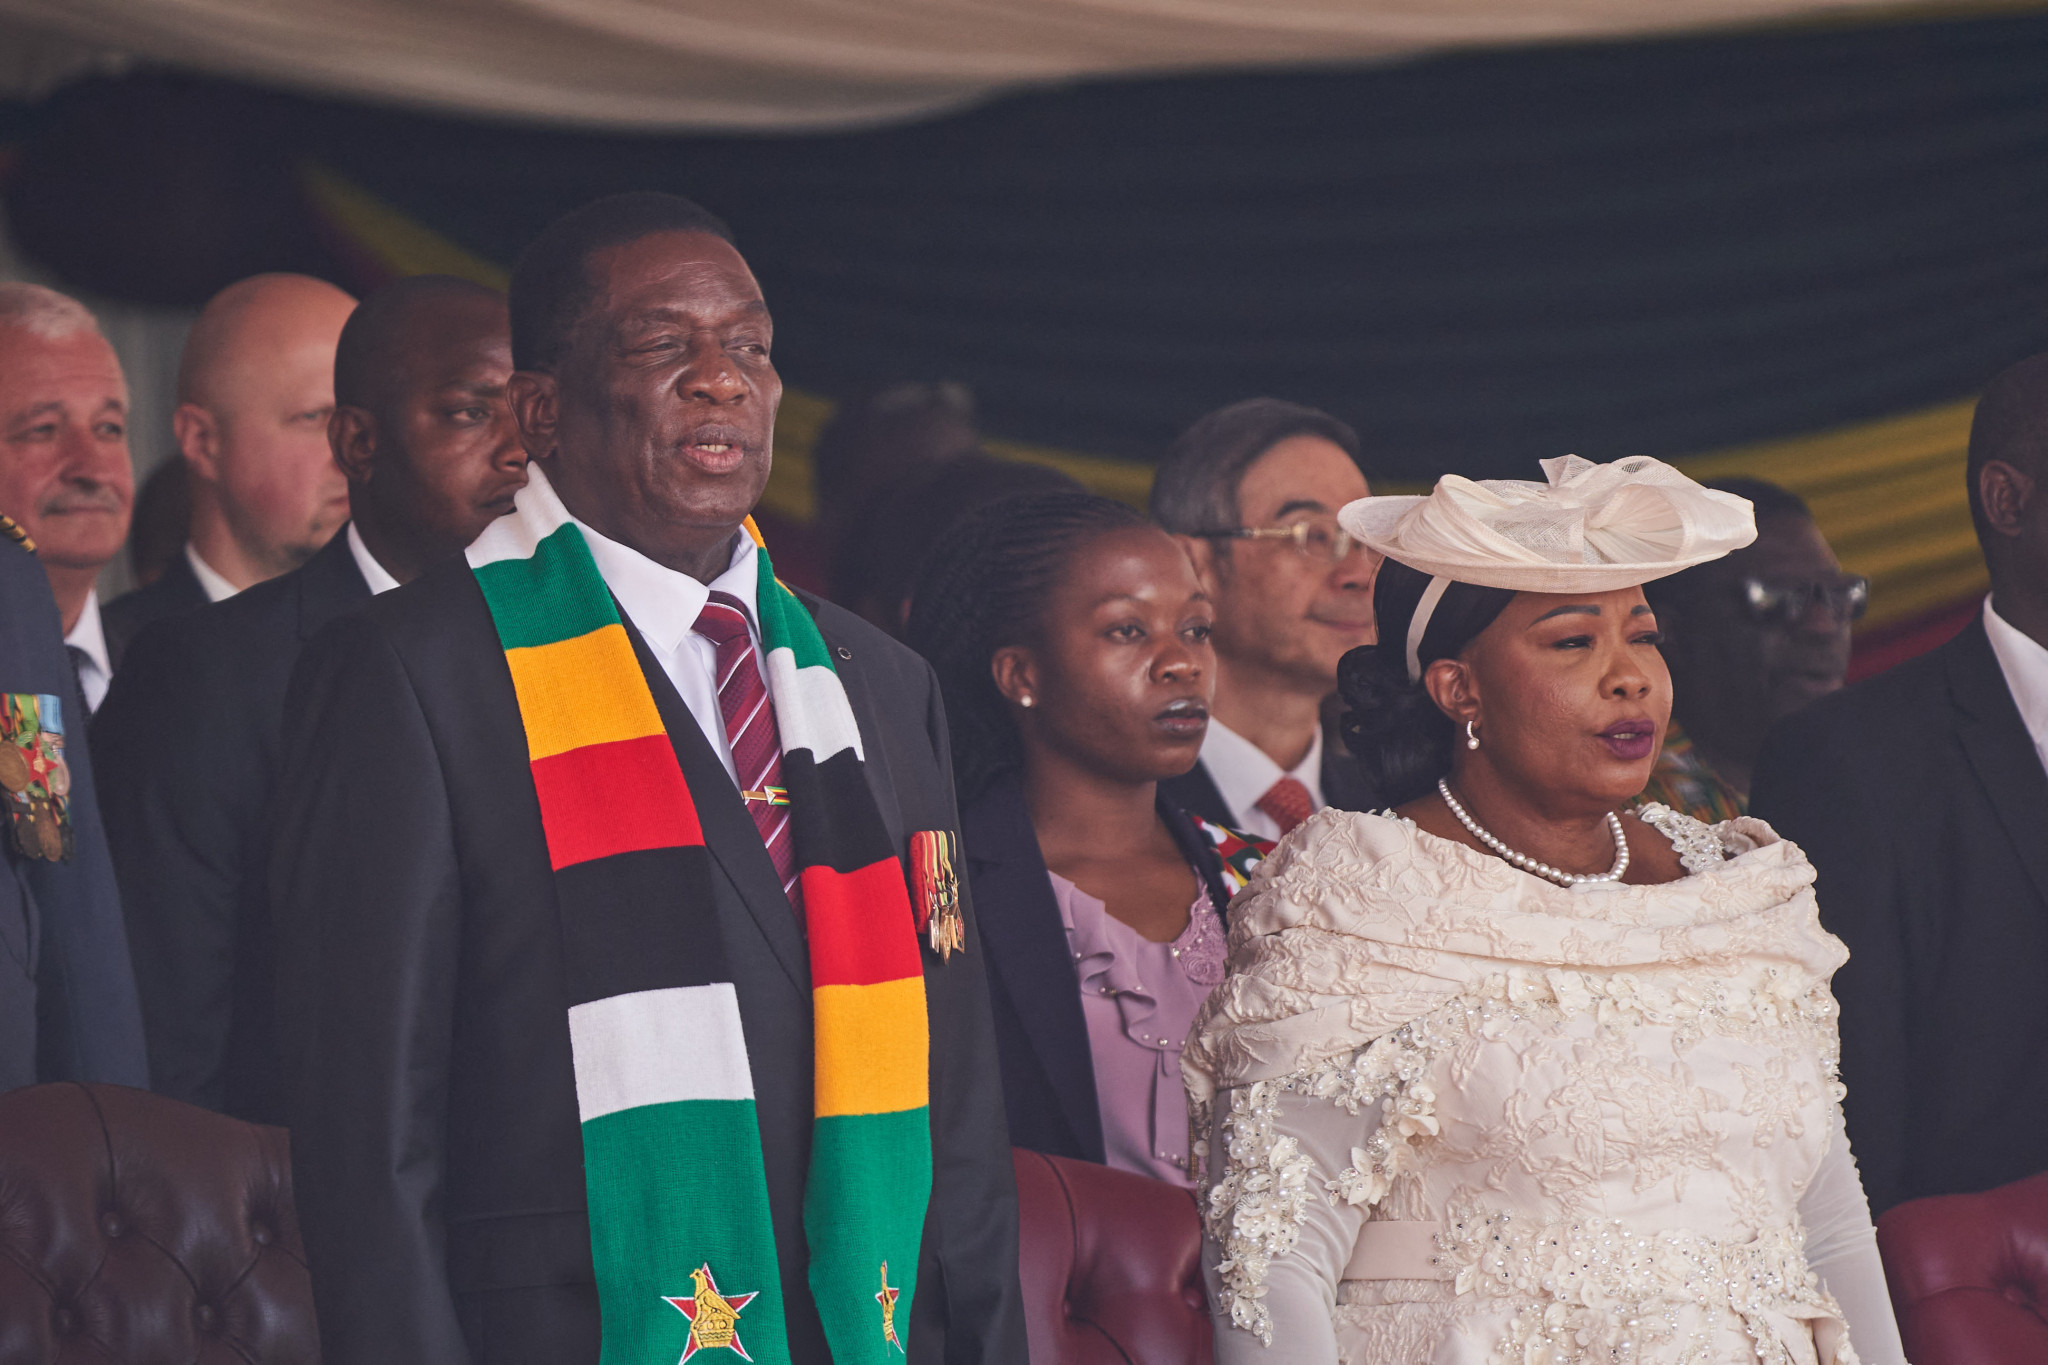 The re-election of Emmerson Mnangagwa as Zimbabwe's President has been criticised by observers for not meeting international standards ©Getty Images